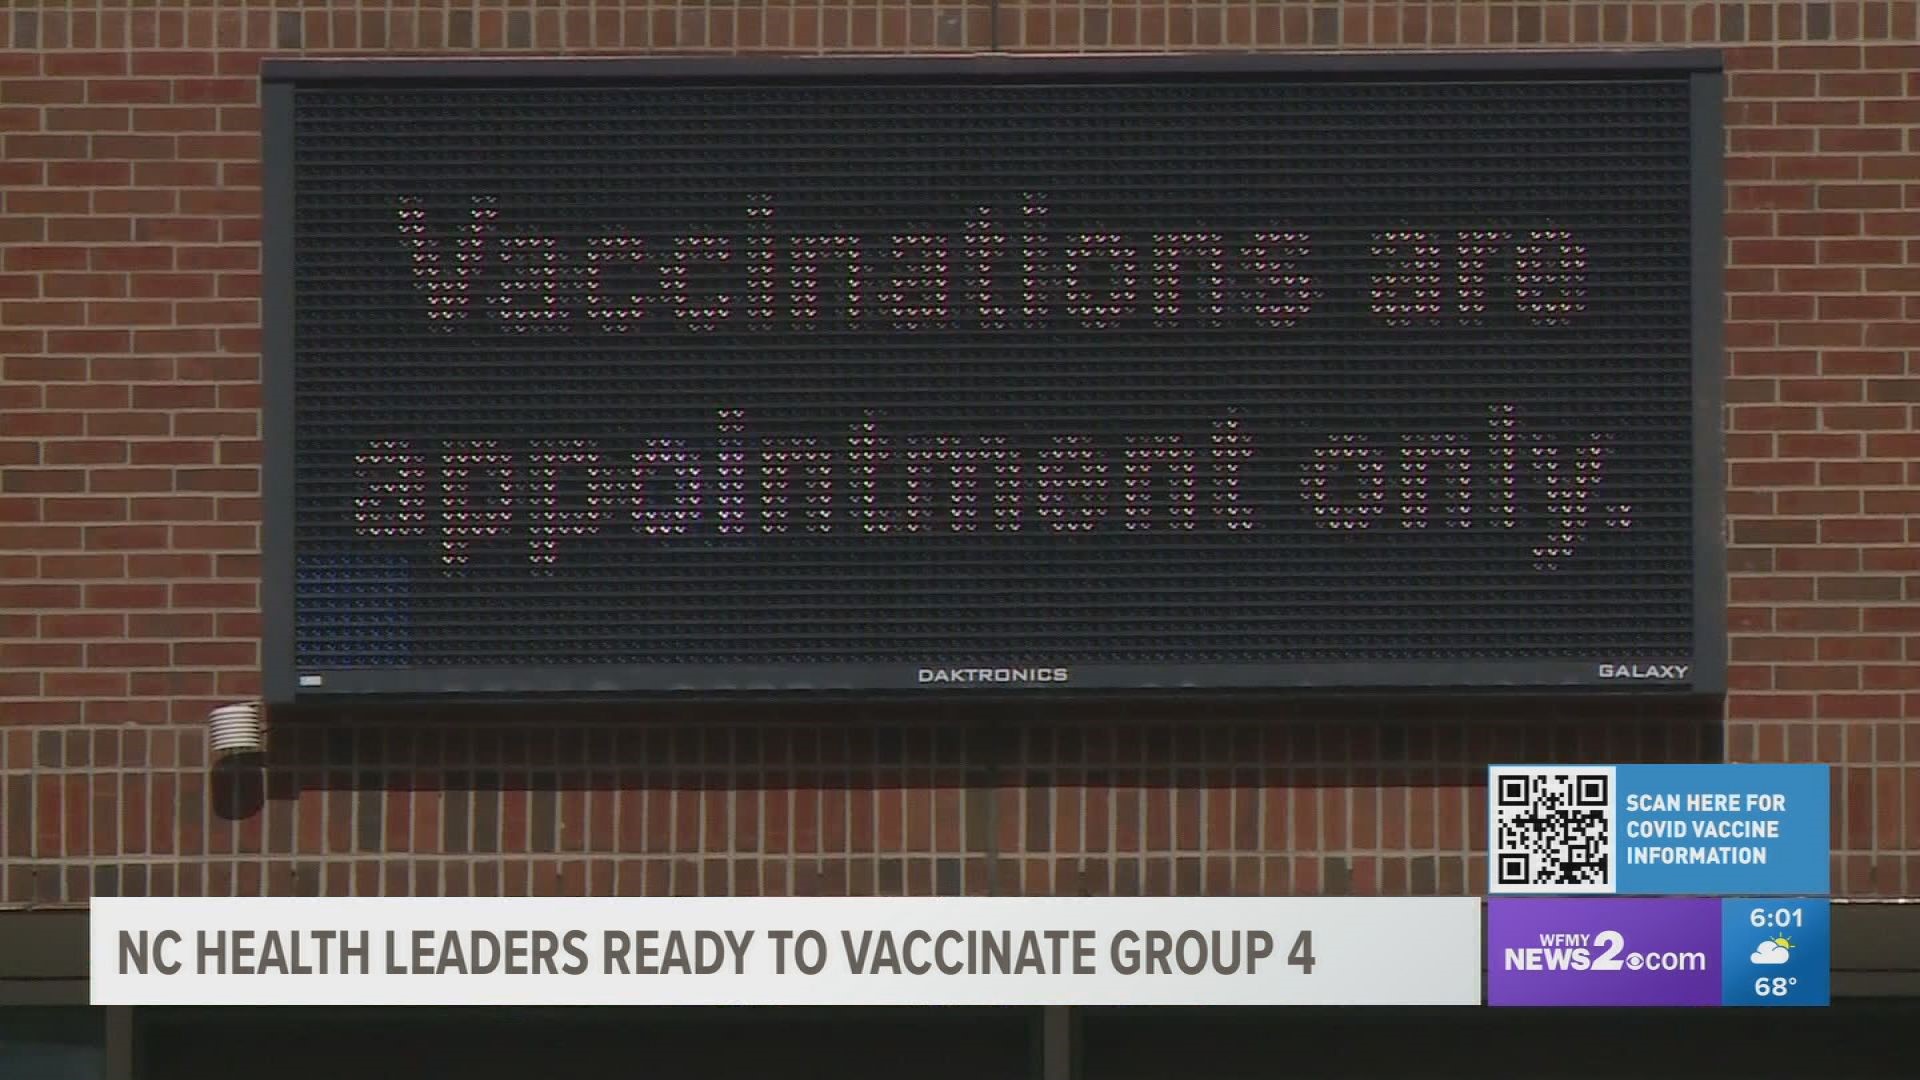 North Carolina will start vaccinating part of group 4 on March 17. Adults with health risks and those living in group settings will be included in that group.